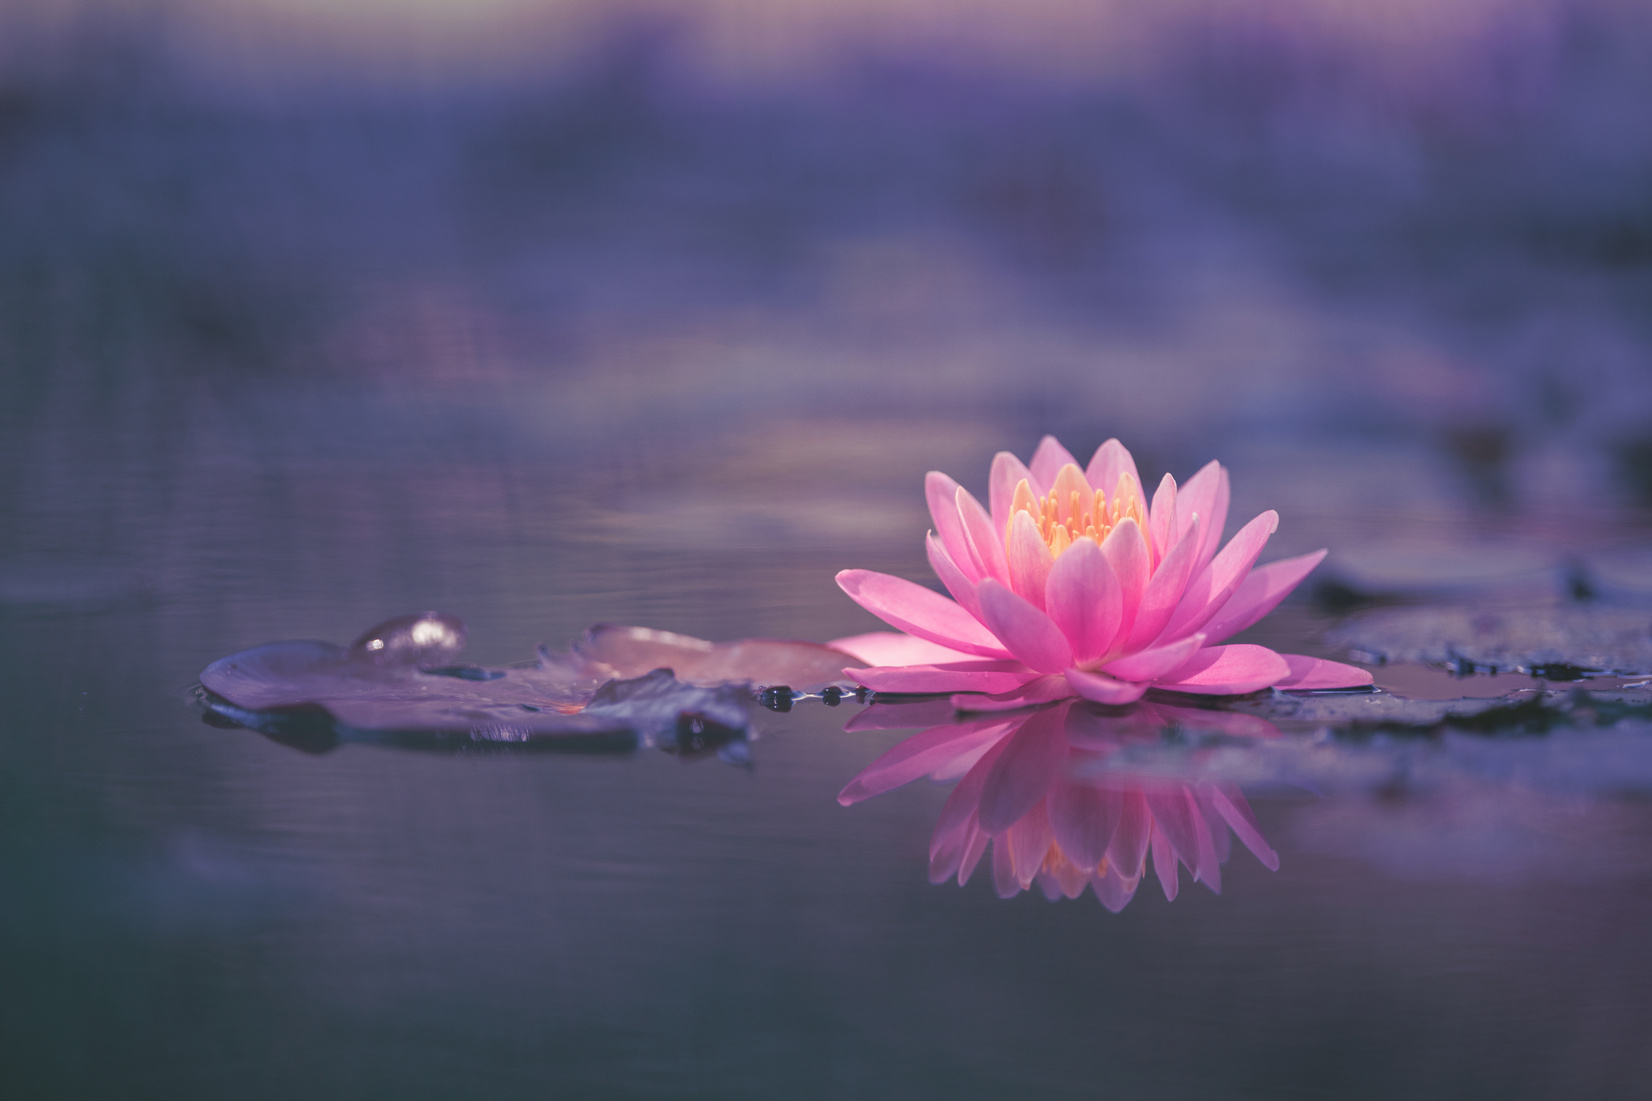 Lotus Flower or Water Lily